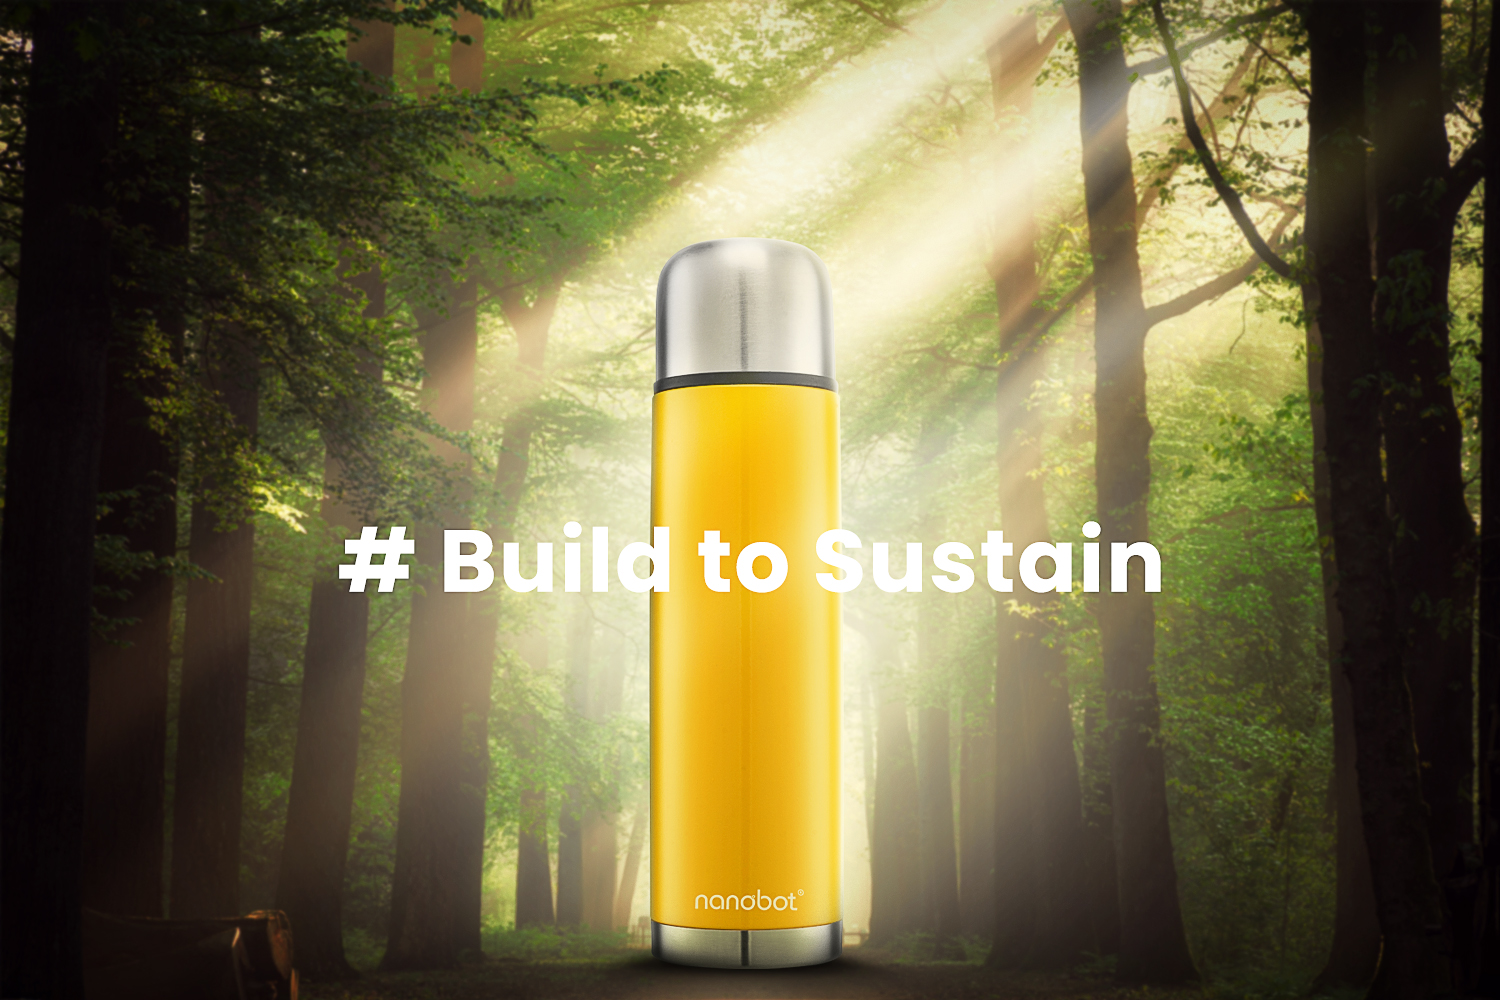 Nanobot Bottles-Gift of Sustainability - Sustainable Corporate Gifts - How Can Nanobot Help Create a Better Future? 